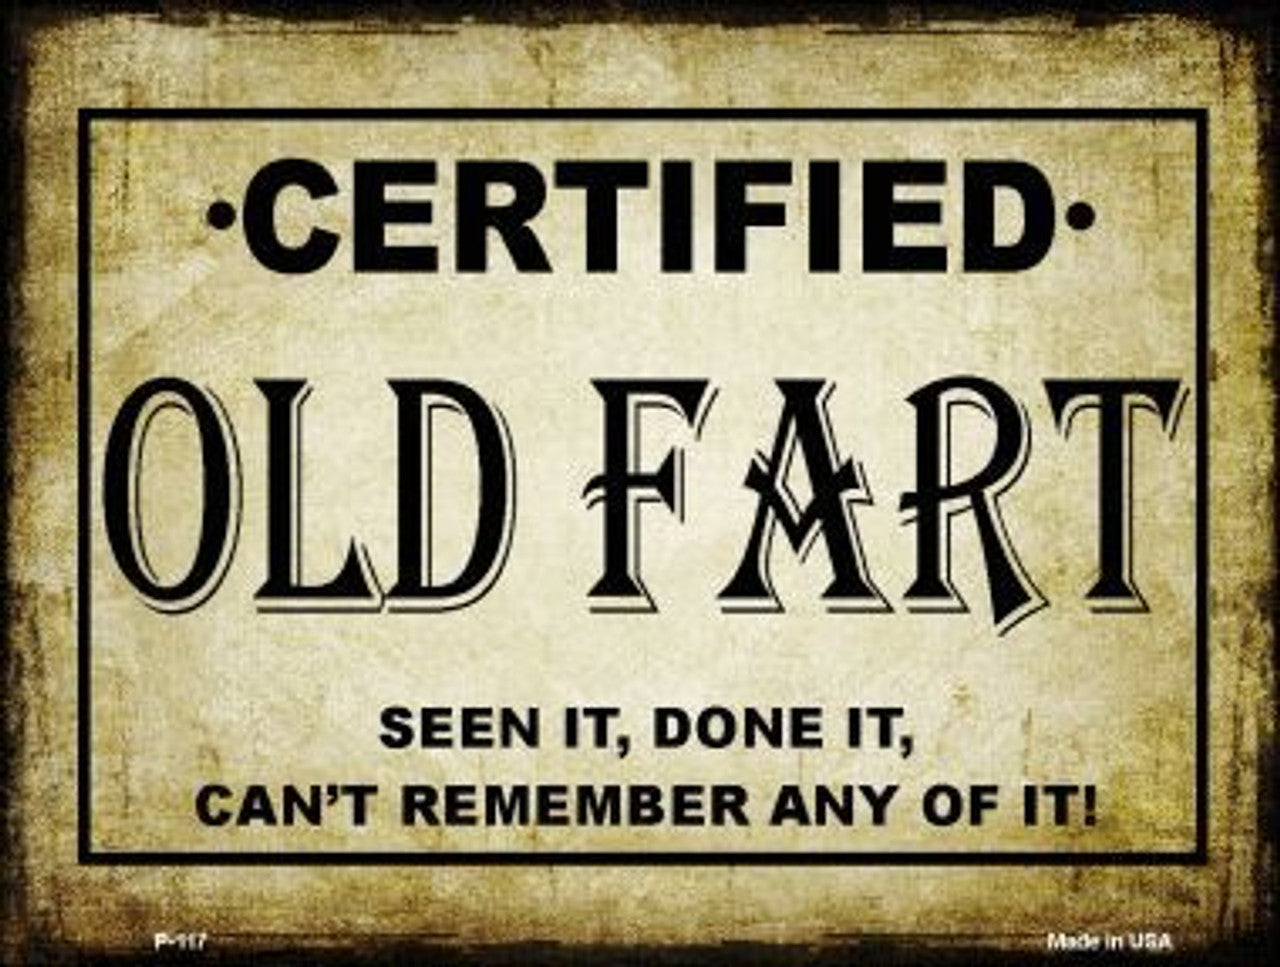 "Certified Old Fart" Novelty Parking Sign - 9" x 12", Weather Resistant, High-Quality Aluminum, Pre-drilled Holes, Made in USA. Brand New and easy to mount.